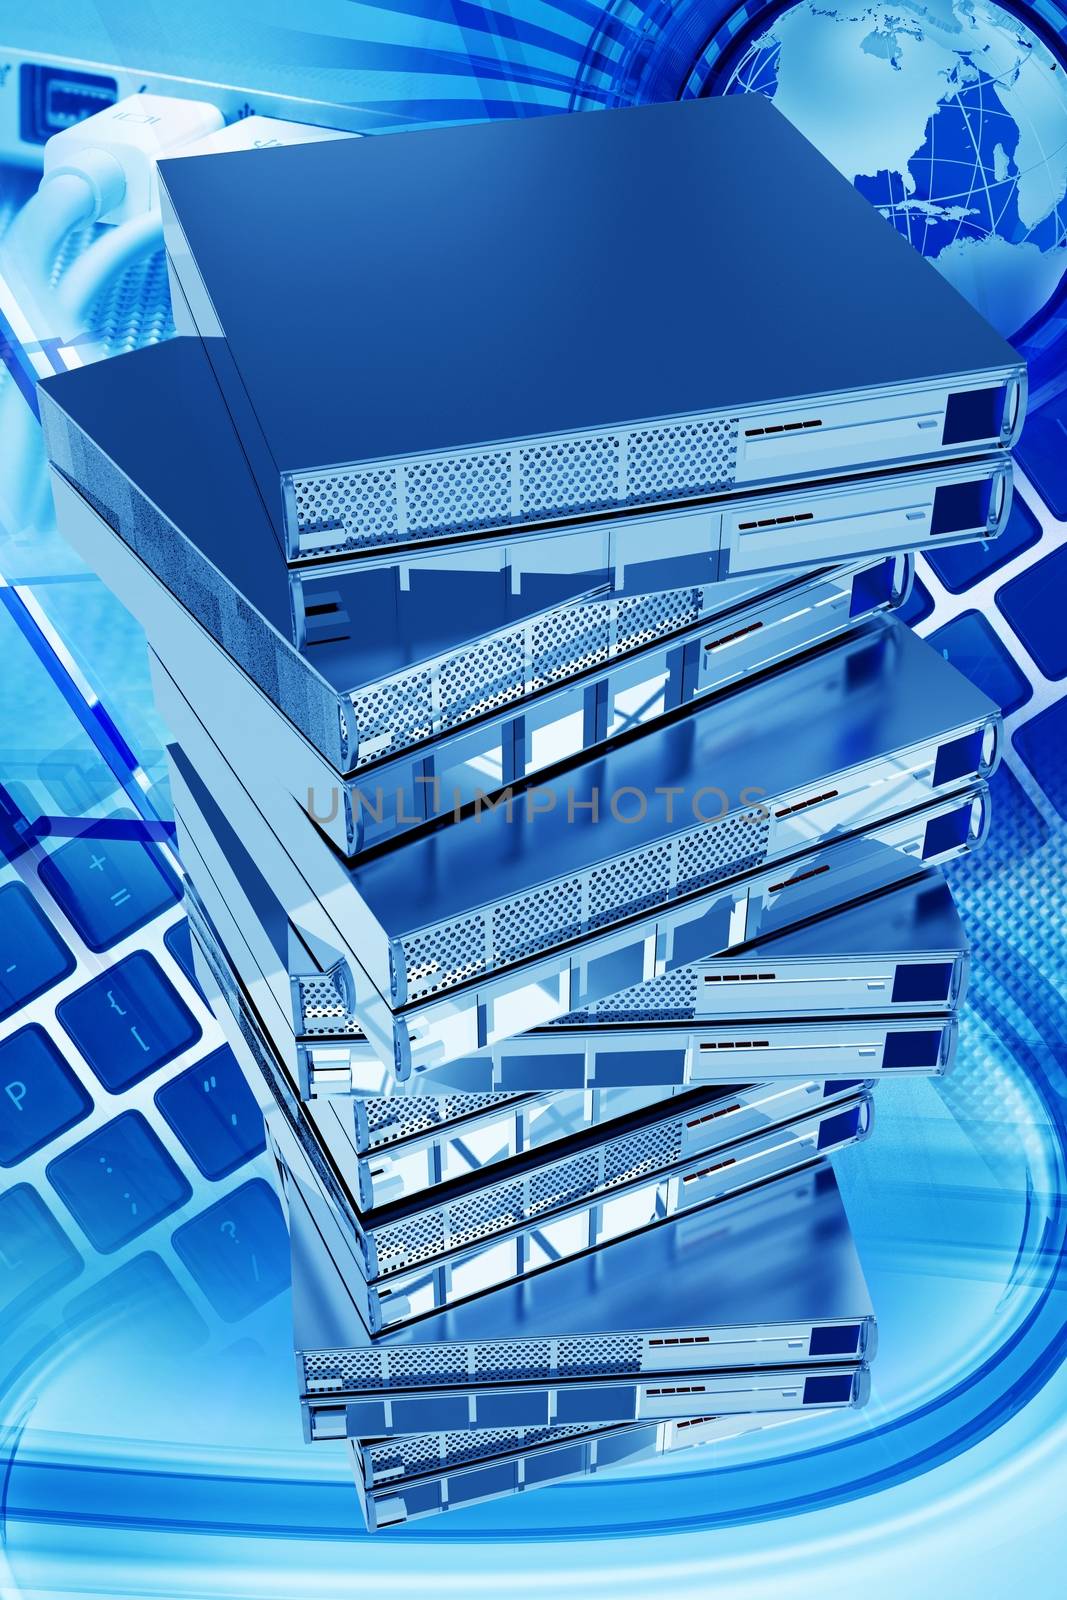 Global Networking Vertical 3D Rendered Illustration. Sixteen Silver Metallic Server Machines Tower. Top View. Cool Global Networking Backround with Keyboards, Globe and Some USB Laptop Connections. Cool Blue Color